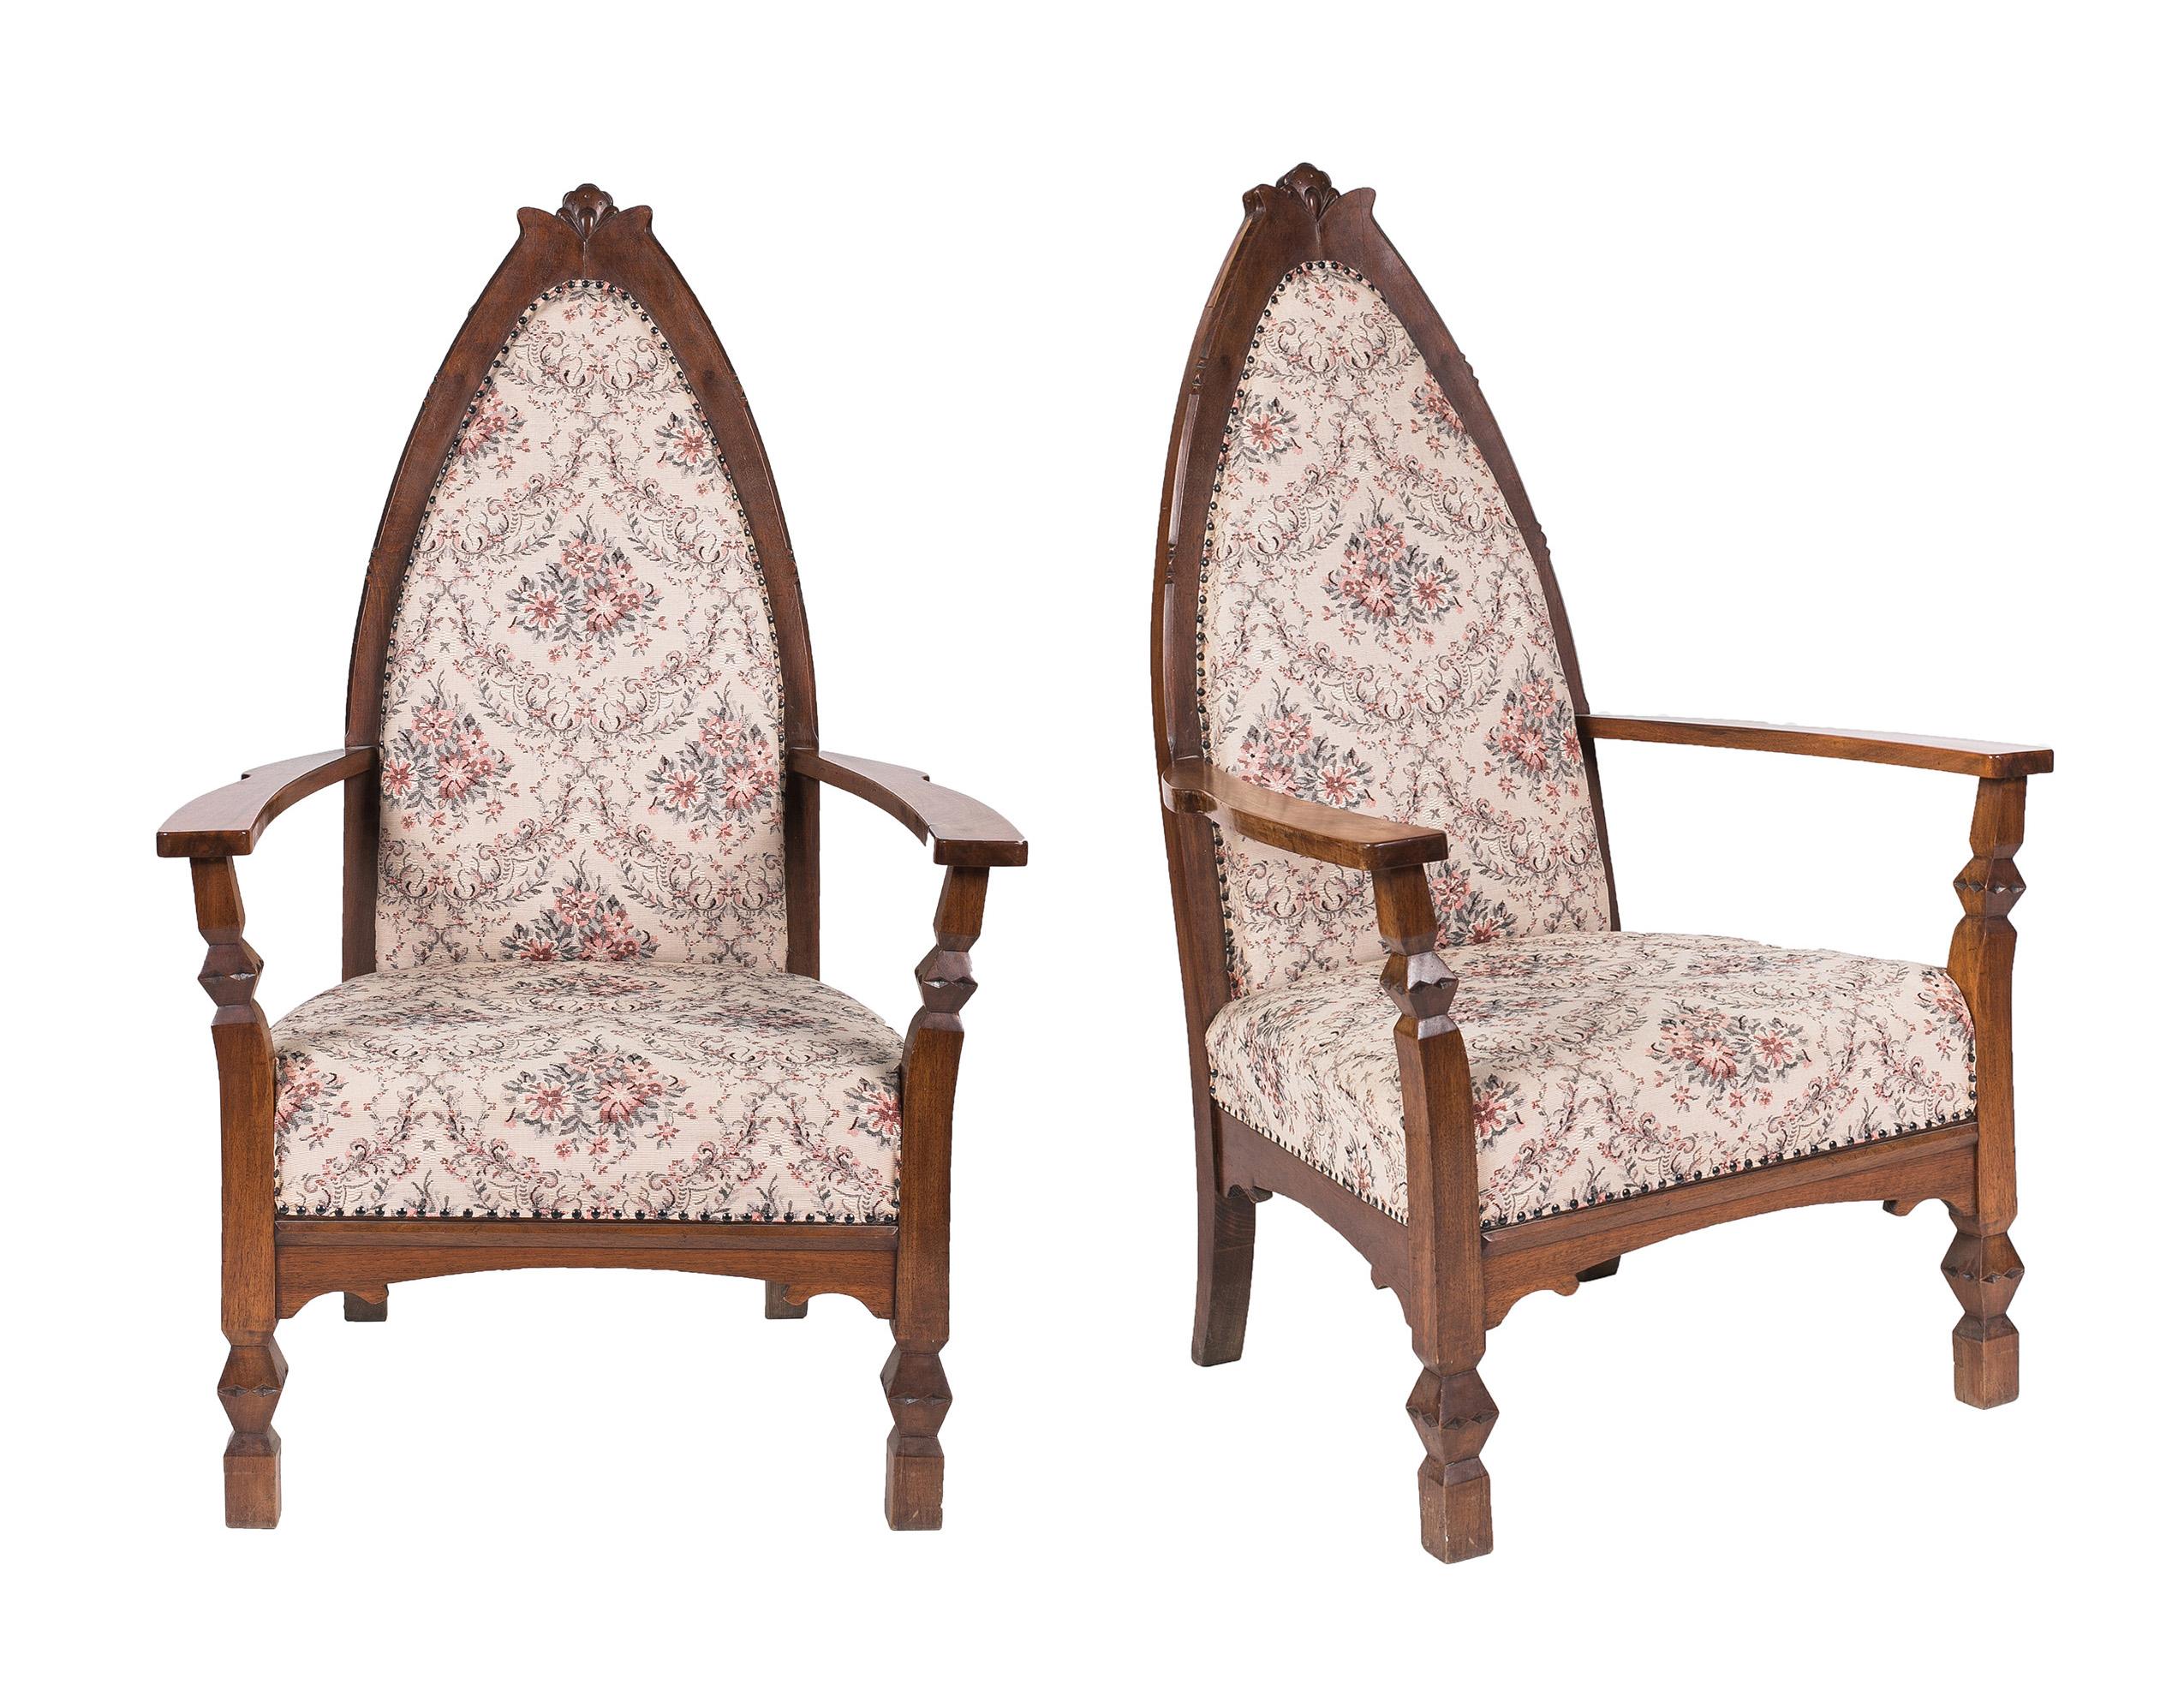 Art Nouveau seating ensemble designed by Hungarian architect and furniture designer Ede Toroczkai Wigand. 
The four pieces ensemble consists of two pairs of separately identical armchairs, with the following dimensions (d/w/h/sh):
2 throne type